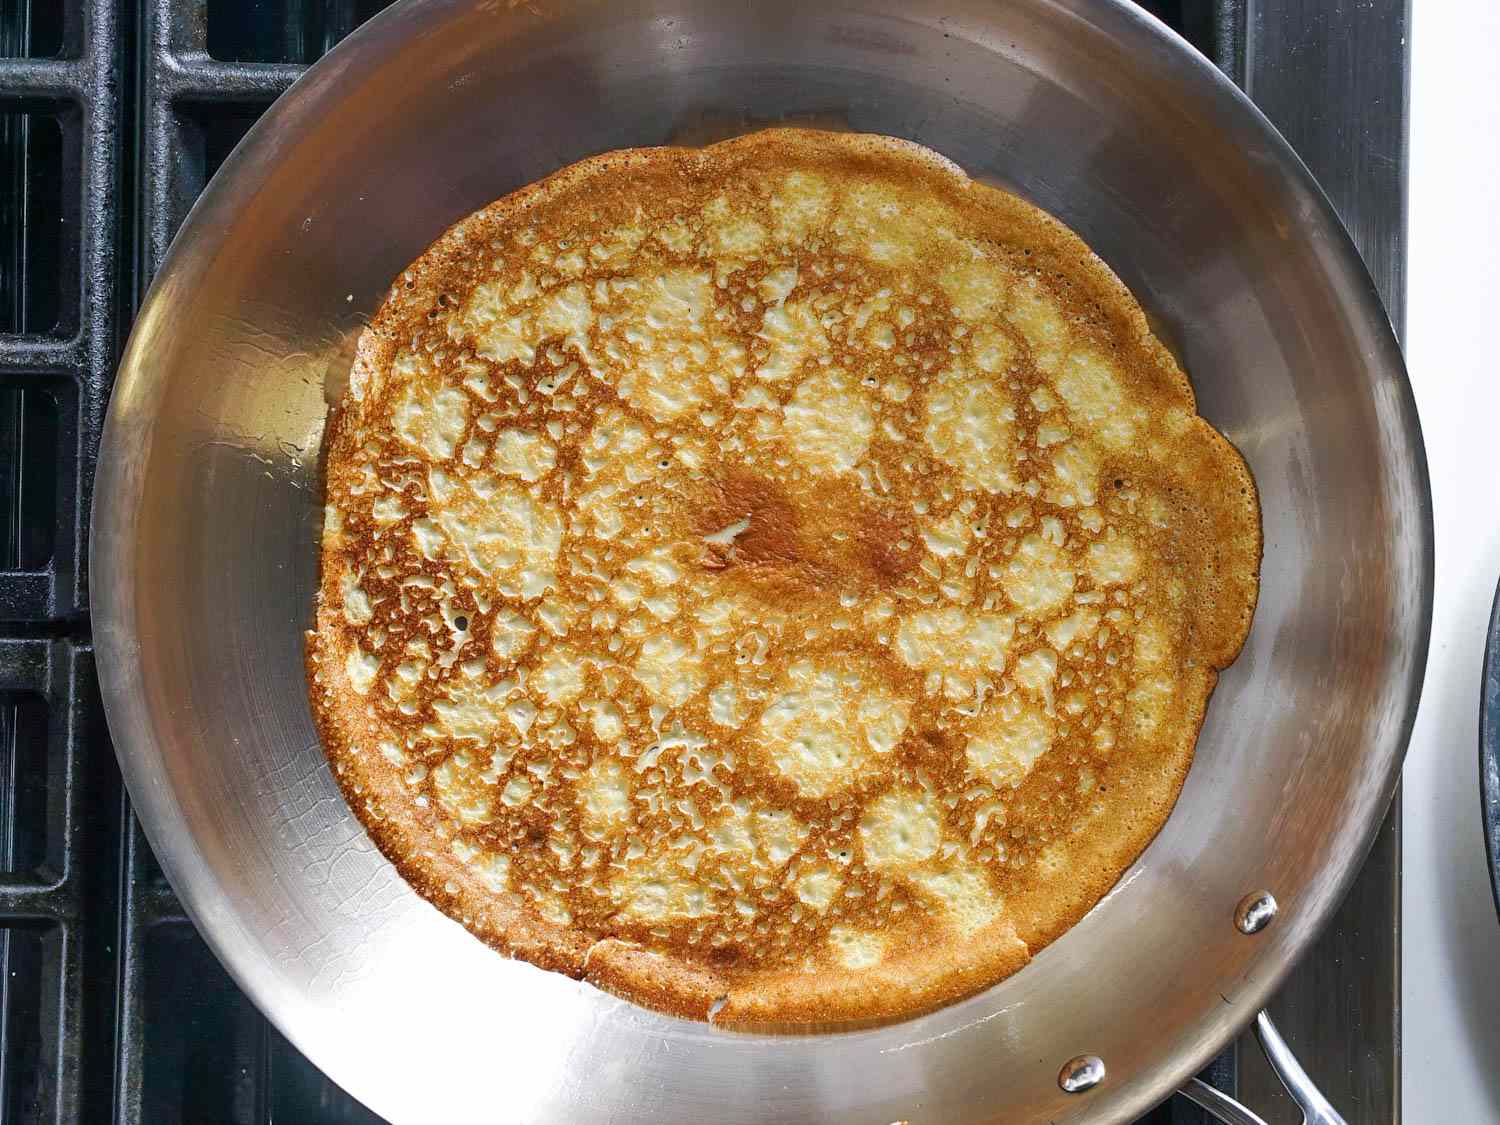 Testing evenness of skillet heating by cooking crepes